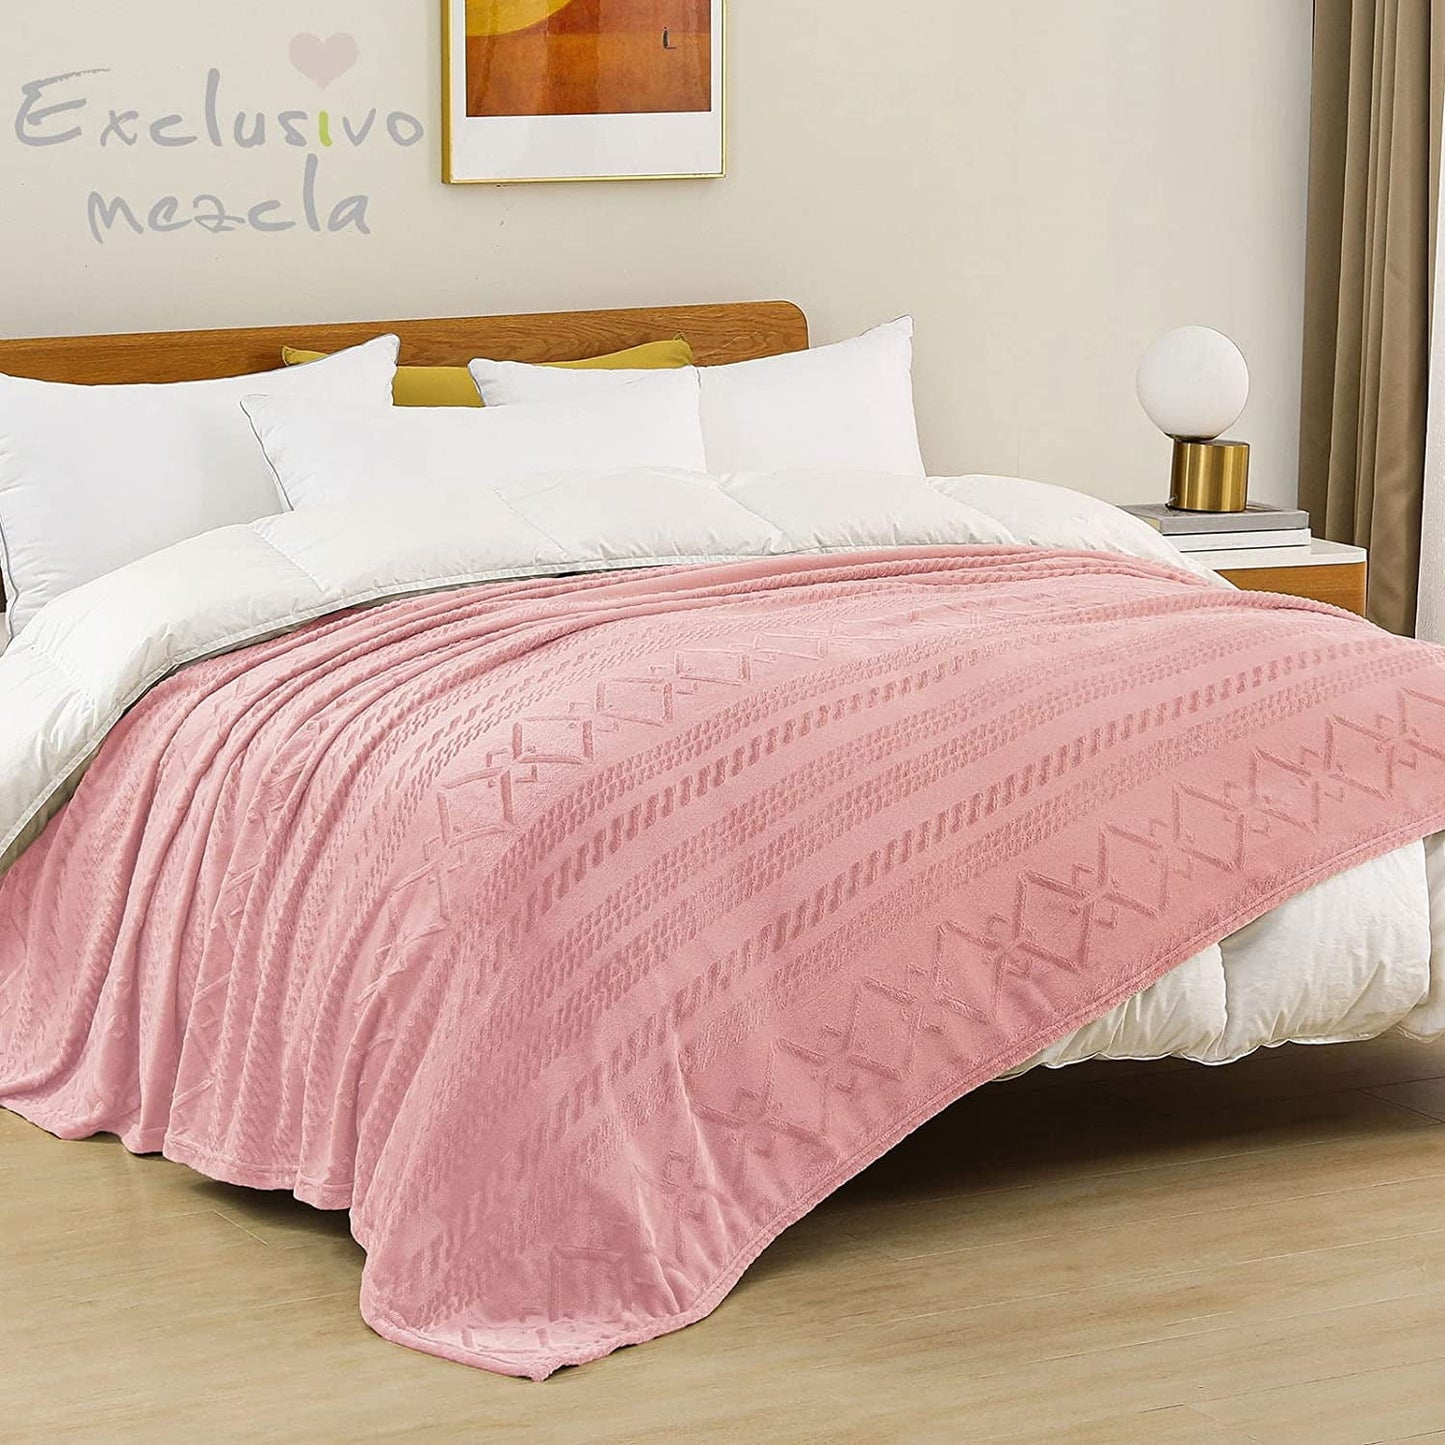 Exclusivo Mezcla King Size Soft Bed Blanket, Warm Fuzzy Luxury Bed Blankets, Decorative Geometry Pattern Plush Throw Blanket for Bed, 90x104 Inches, Pink